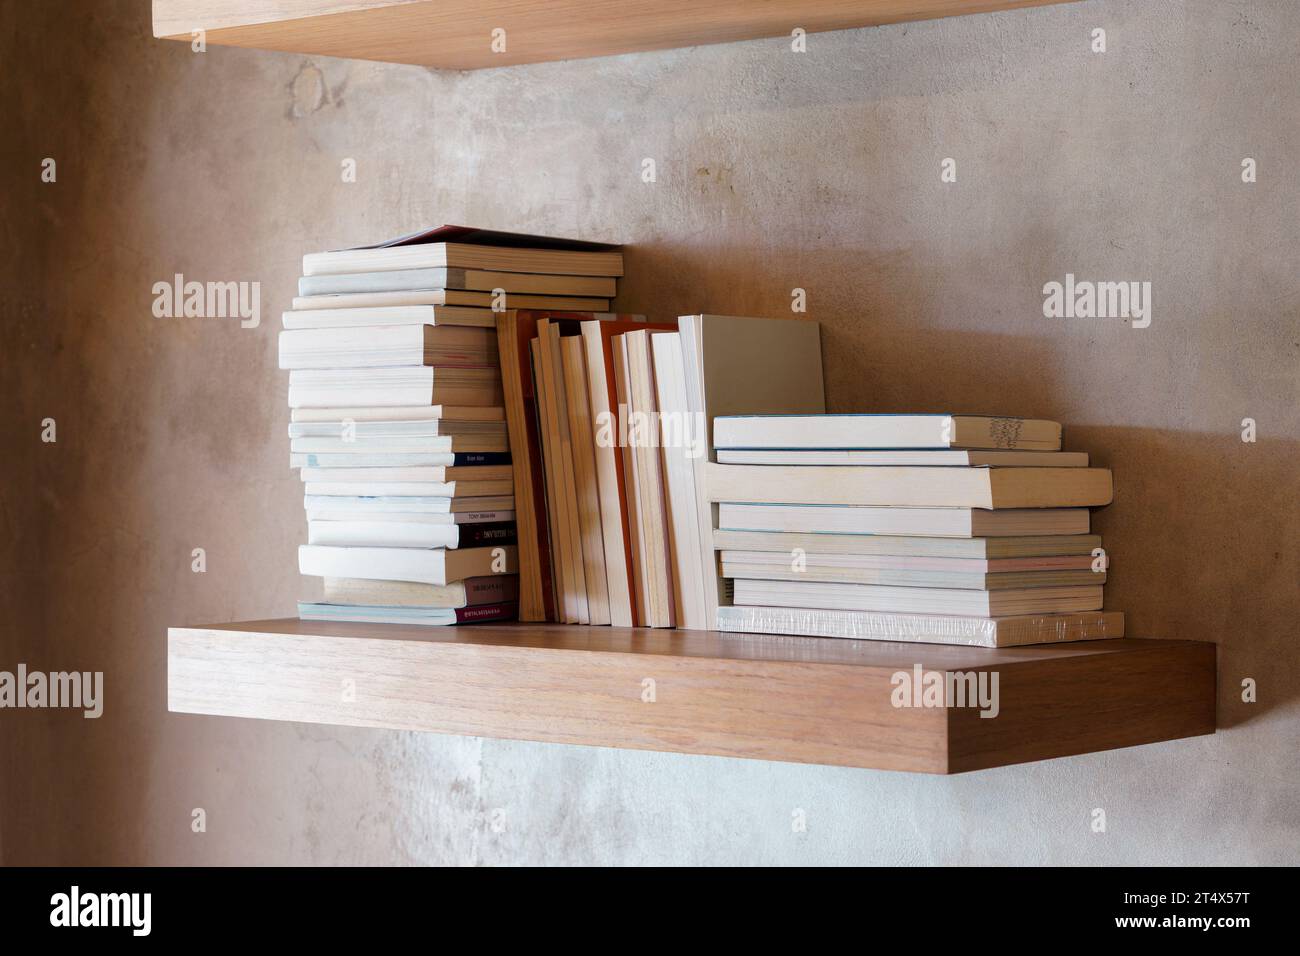 Stack of books on floating wooden bookshelf. Education and knowledge concept. Pile of books to read. House interior decoration Stock Photo